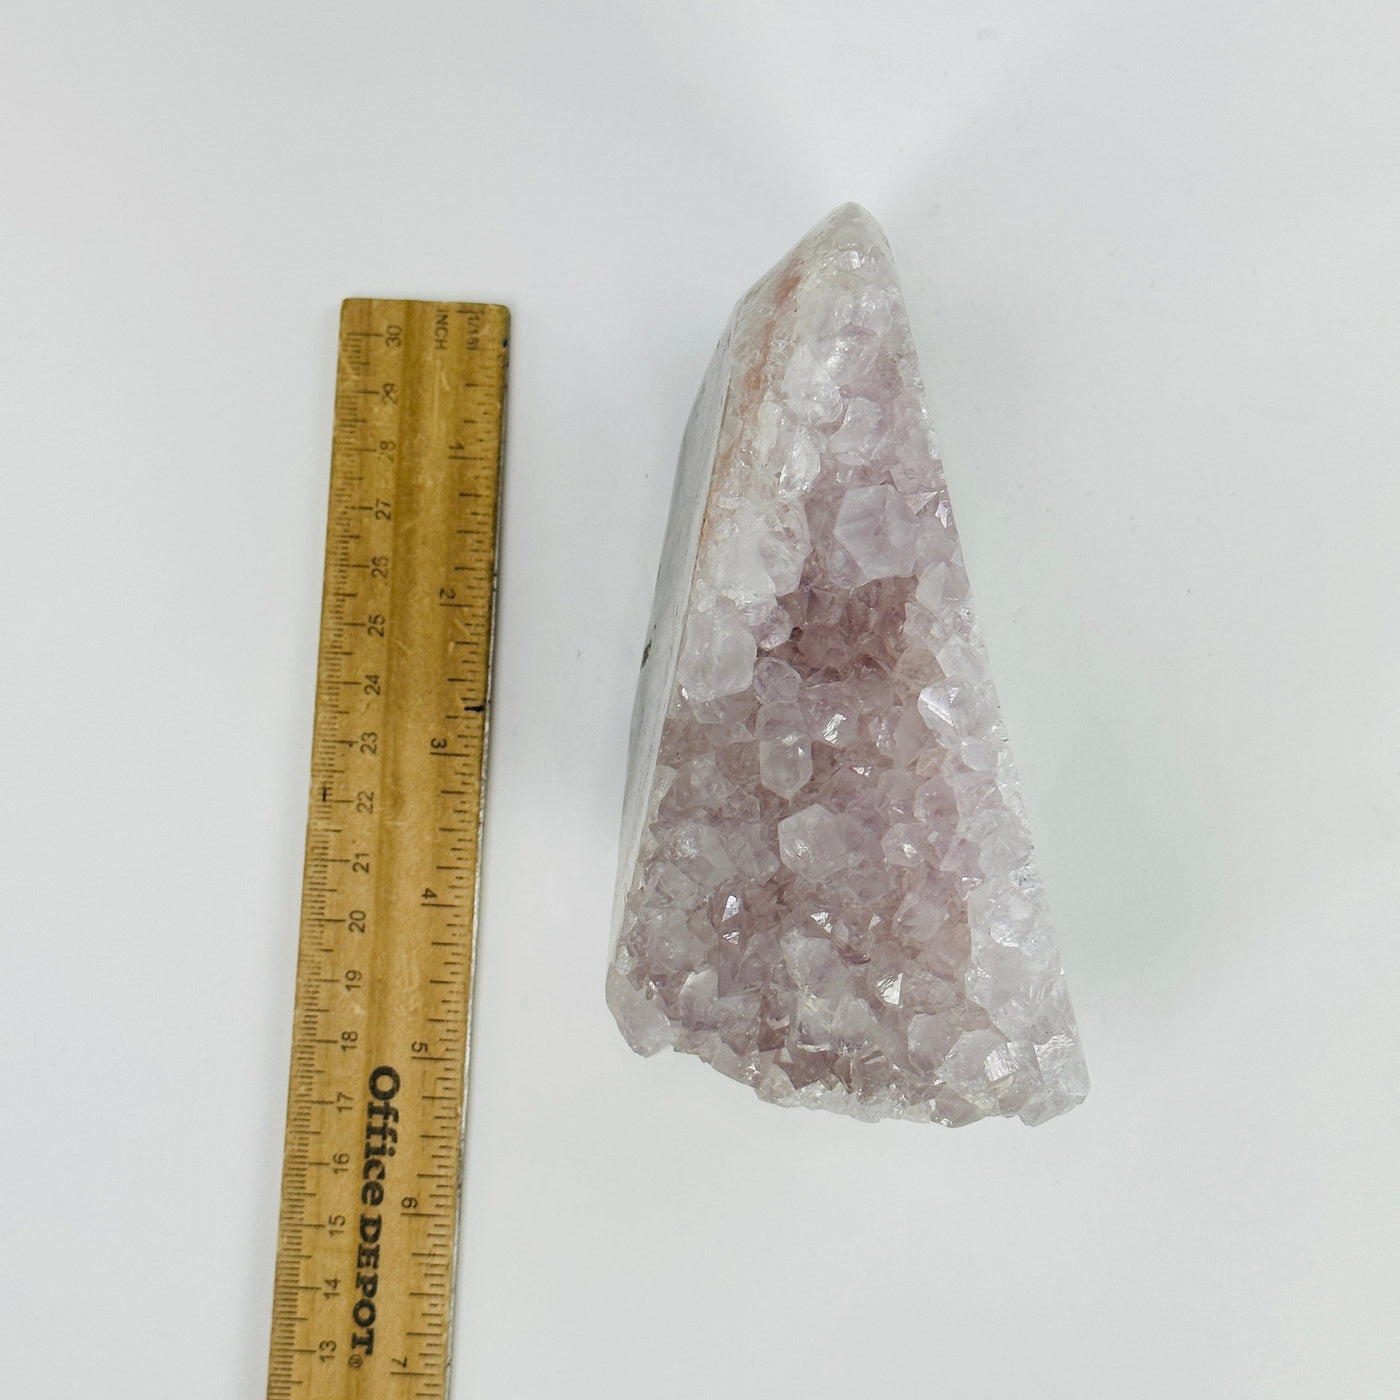 amethyst stalactite cut base next to a ruler for size reference